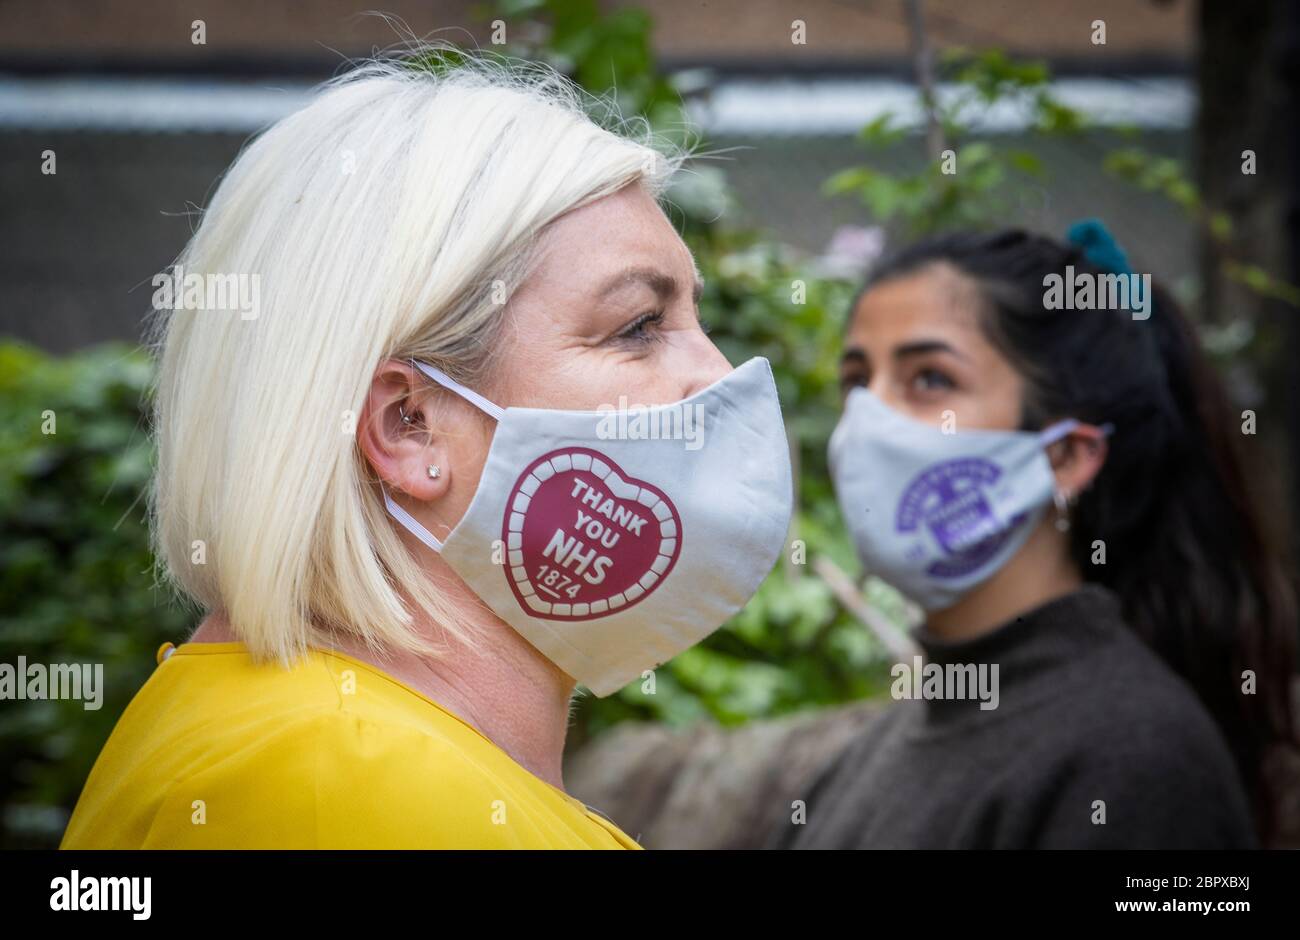 Claire McLachlan models a football team branded face mask designed by newly established Edinburgh pop-up company Breathe Easy which is producing a range of re-useable face coverings to help in the fight against COVID-19. Stock Photo